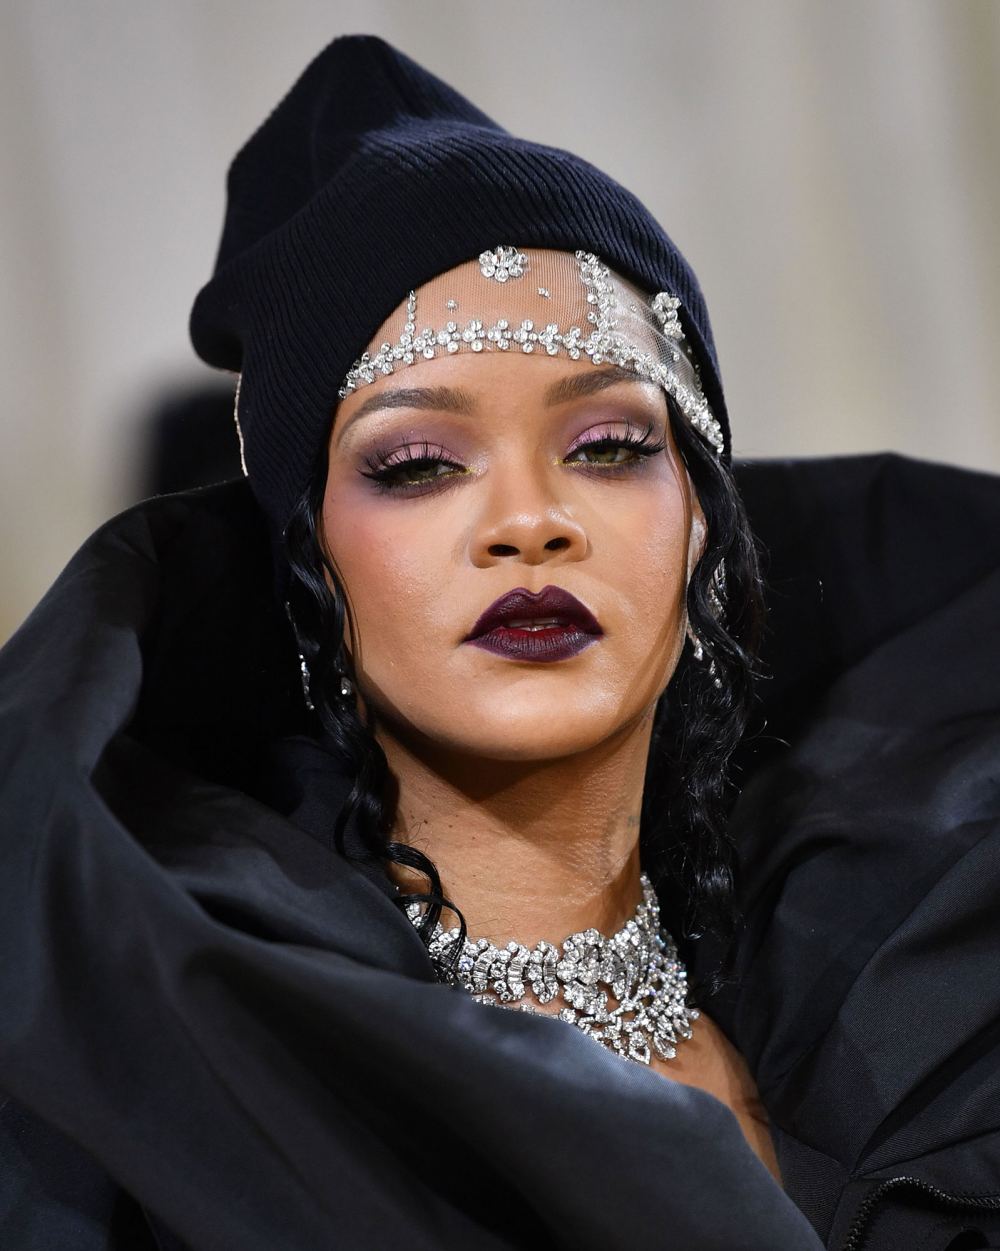 Rihanna’s Savage x Fenty Fashion Show Goes ‘Bigger and Better’ With Help From Gigi Hadid and More